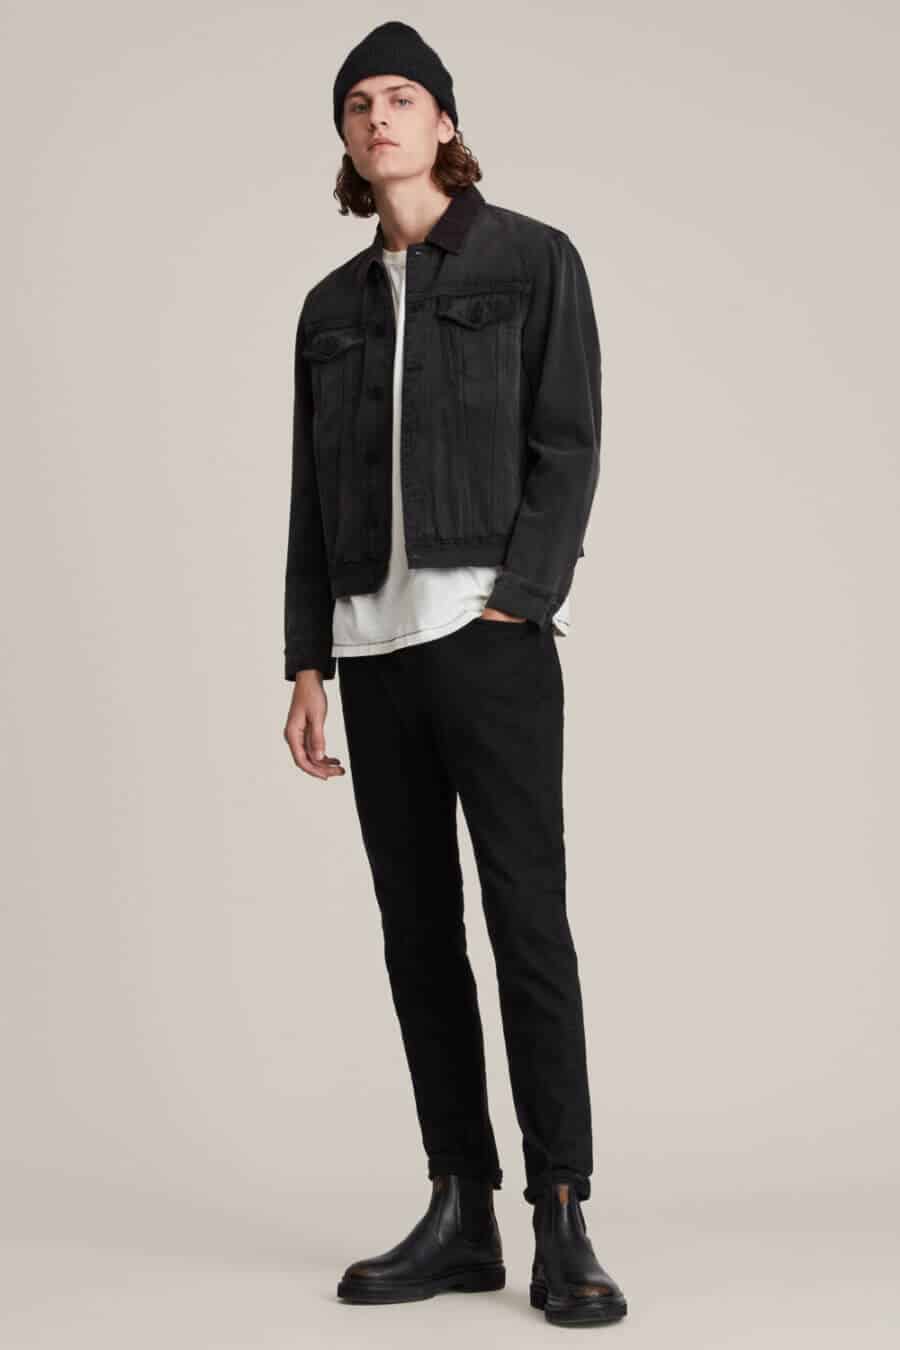 Men's black double denim outfit with jeans, trucker jacket and white T-shirt